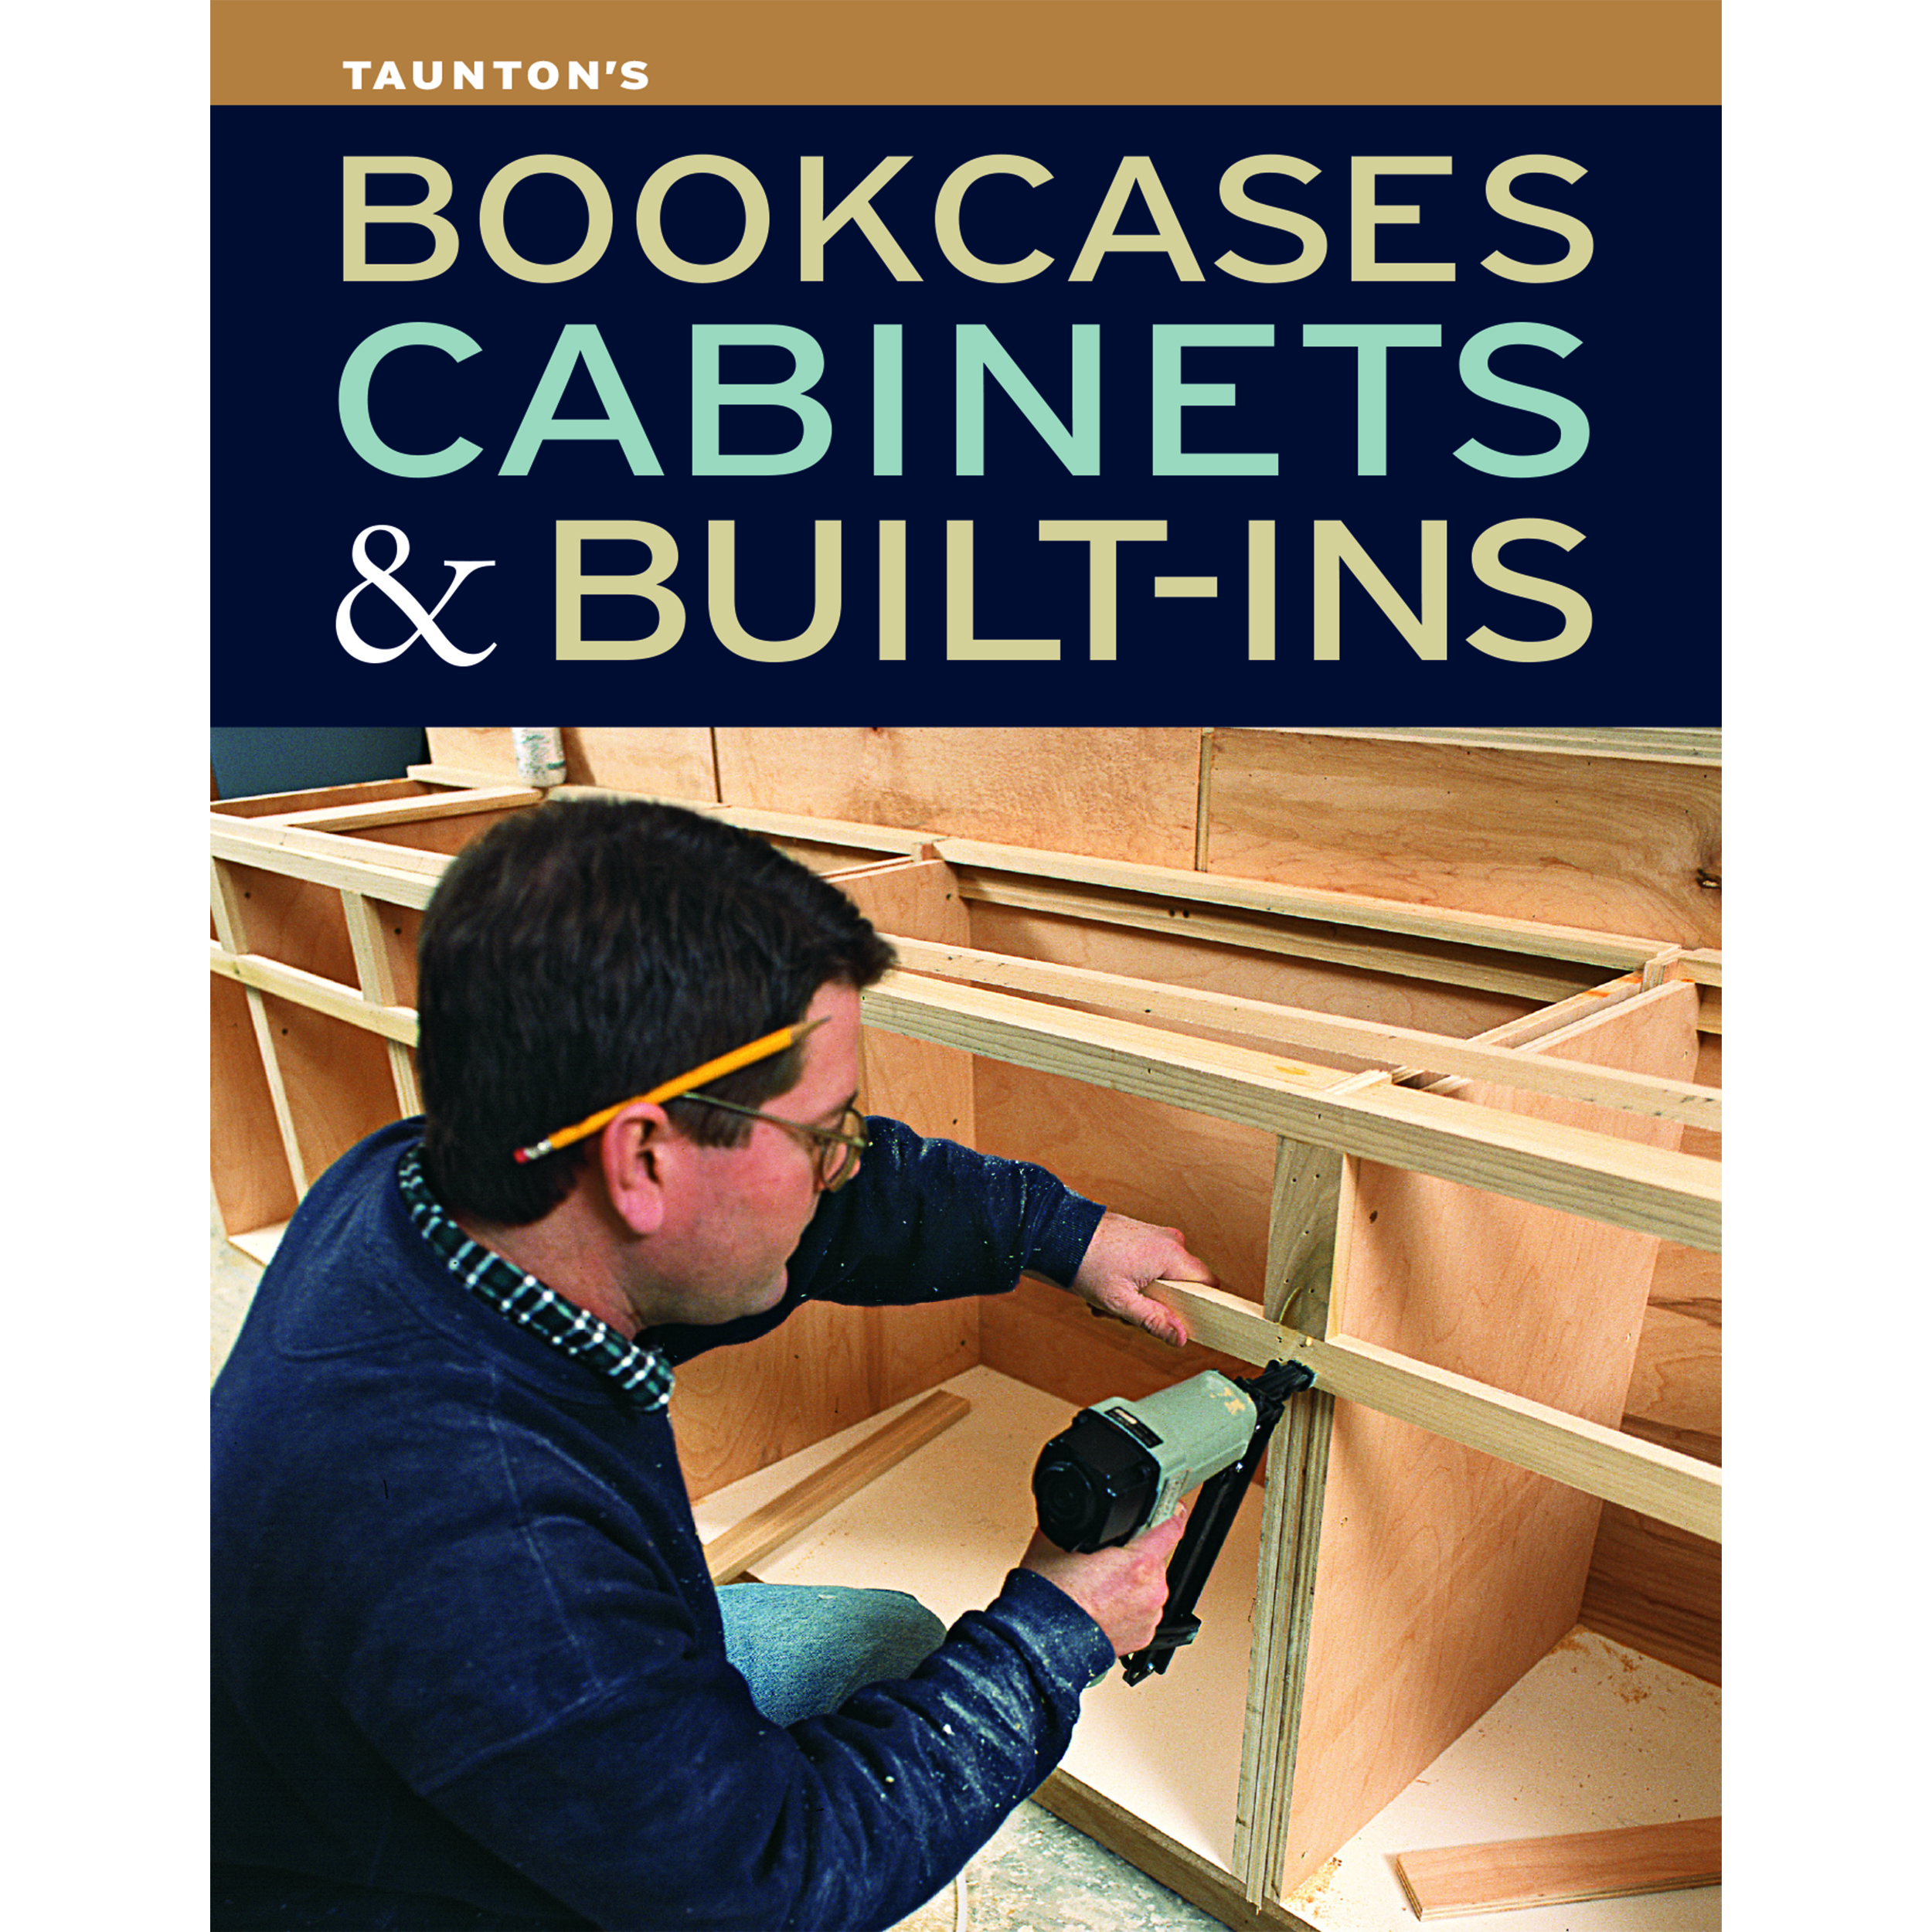 Bookcases, Cabinets, & Built-ins